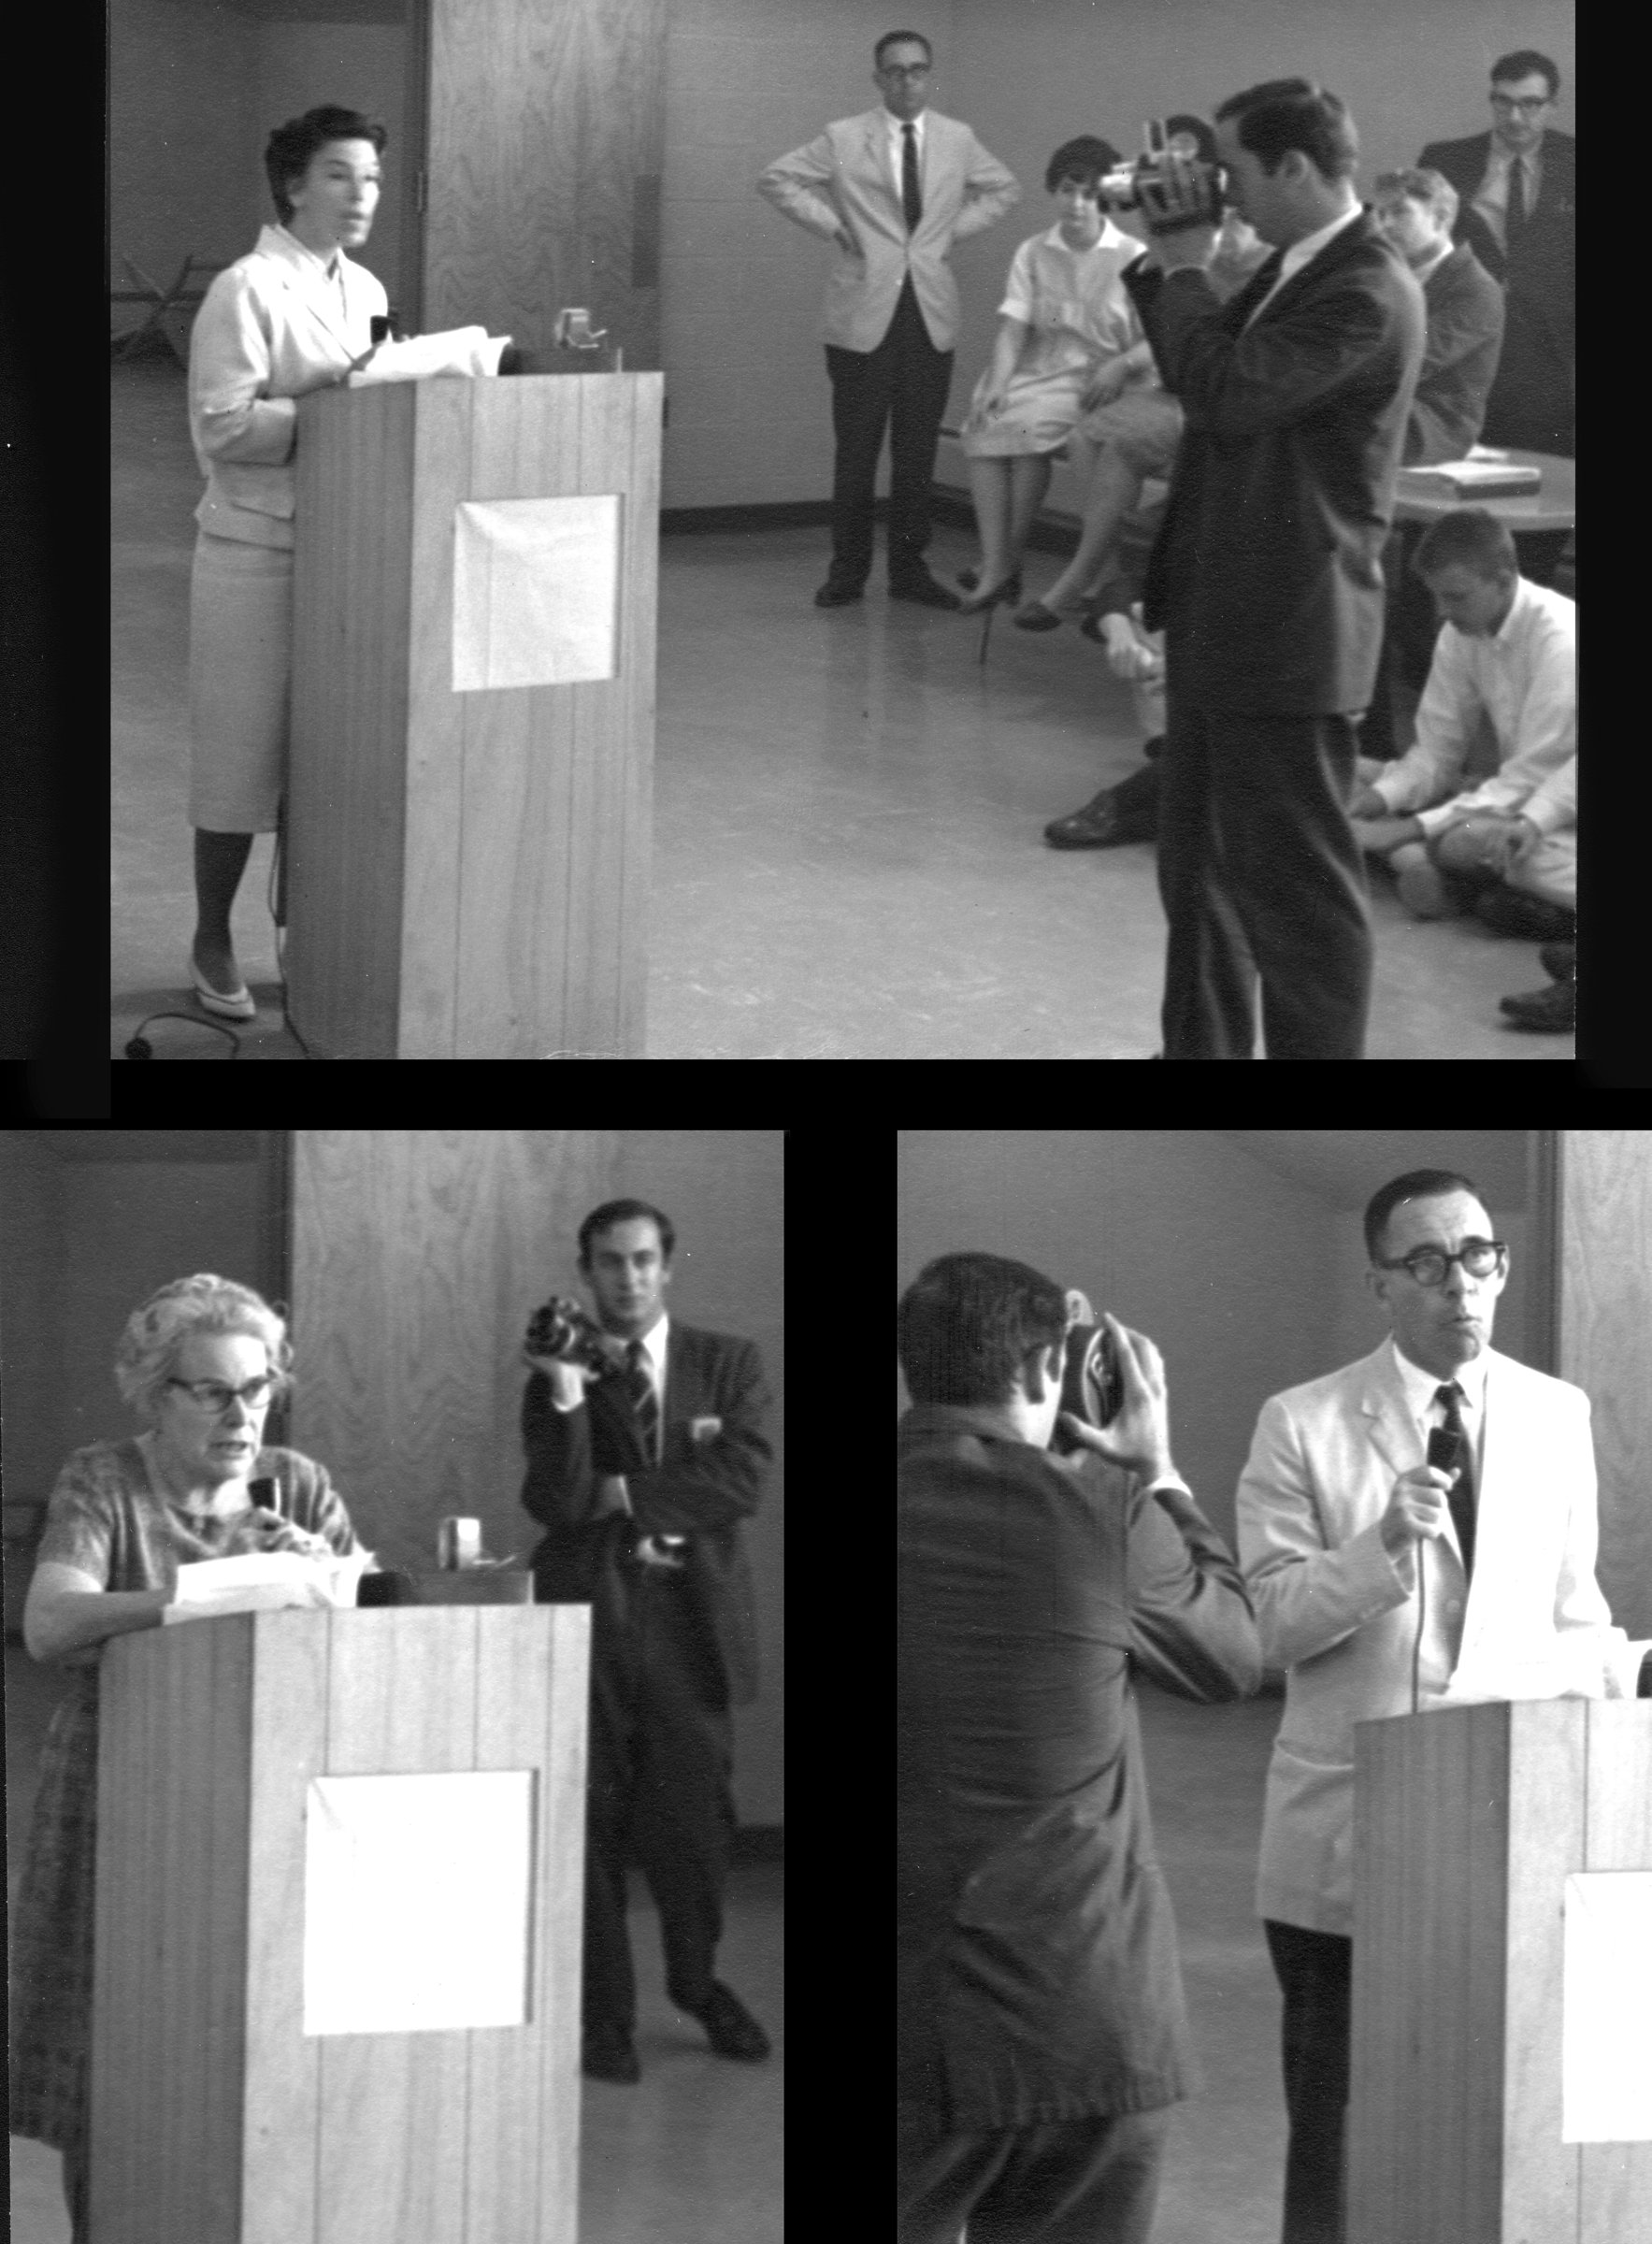 May 20, 1965, five full-time Ph.D, the core of the faculty [hold] a press conference to announce resignations in a dispute with Dr. Robert Reid, Director.  